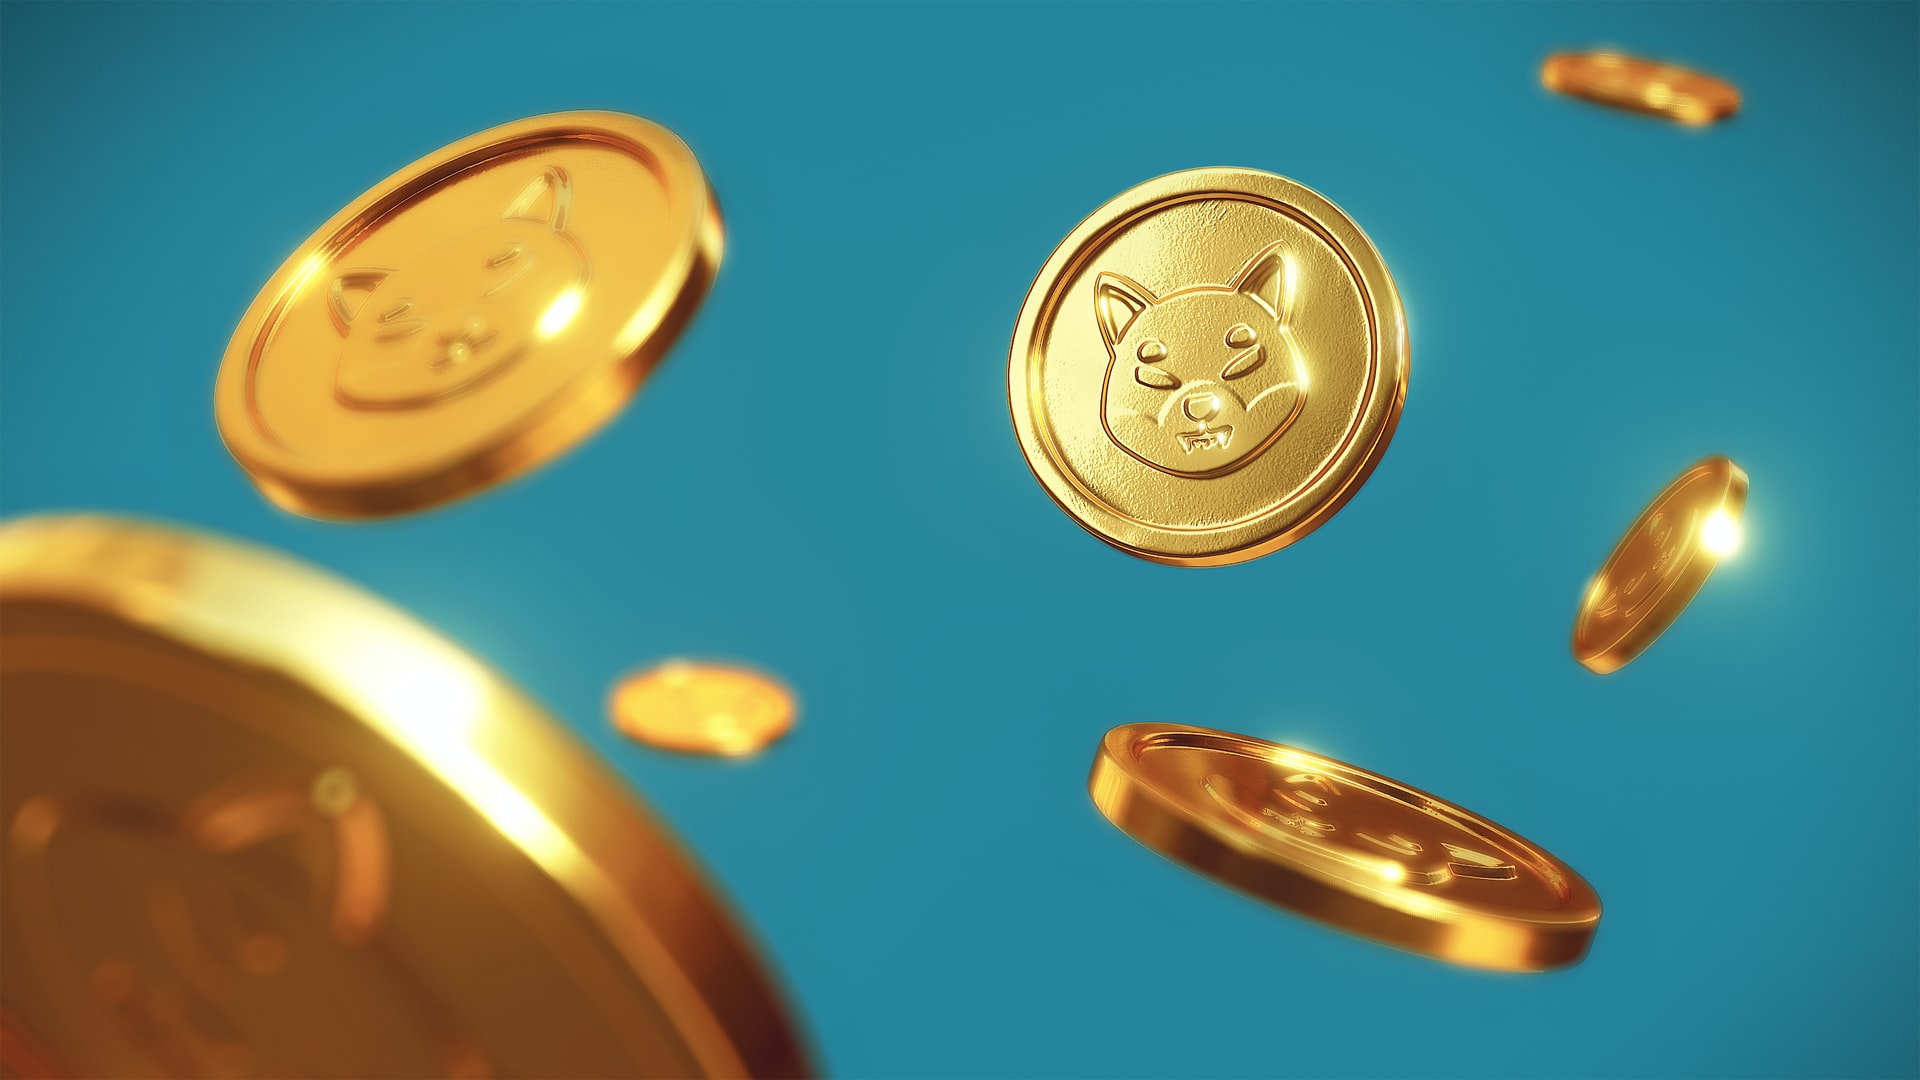 Shiba Inu Stablecoin Inches Towards Completion; Here’s What We Know So Far